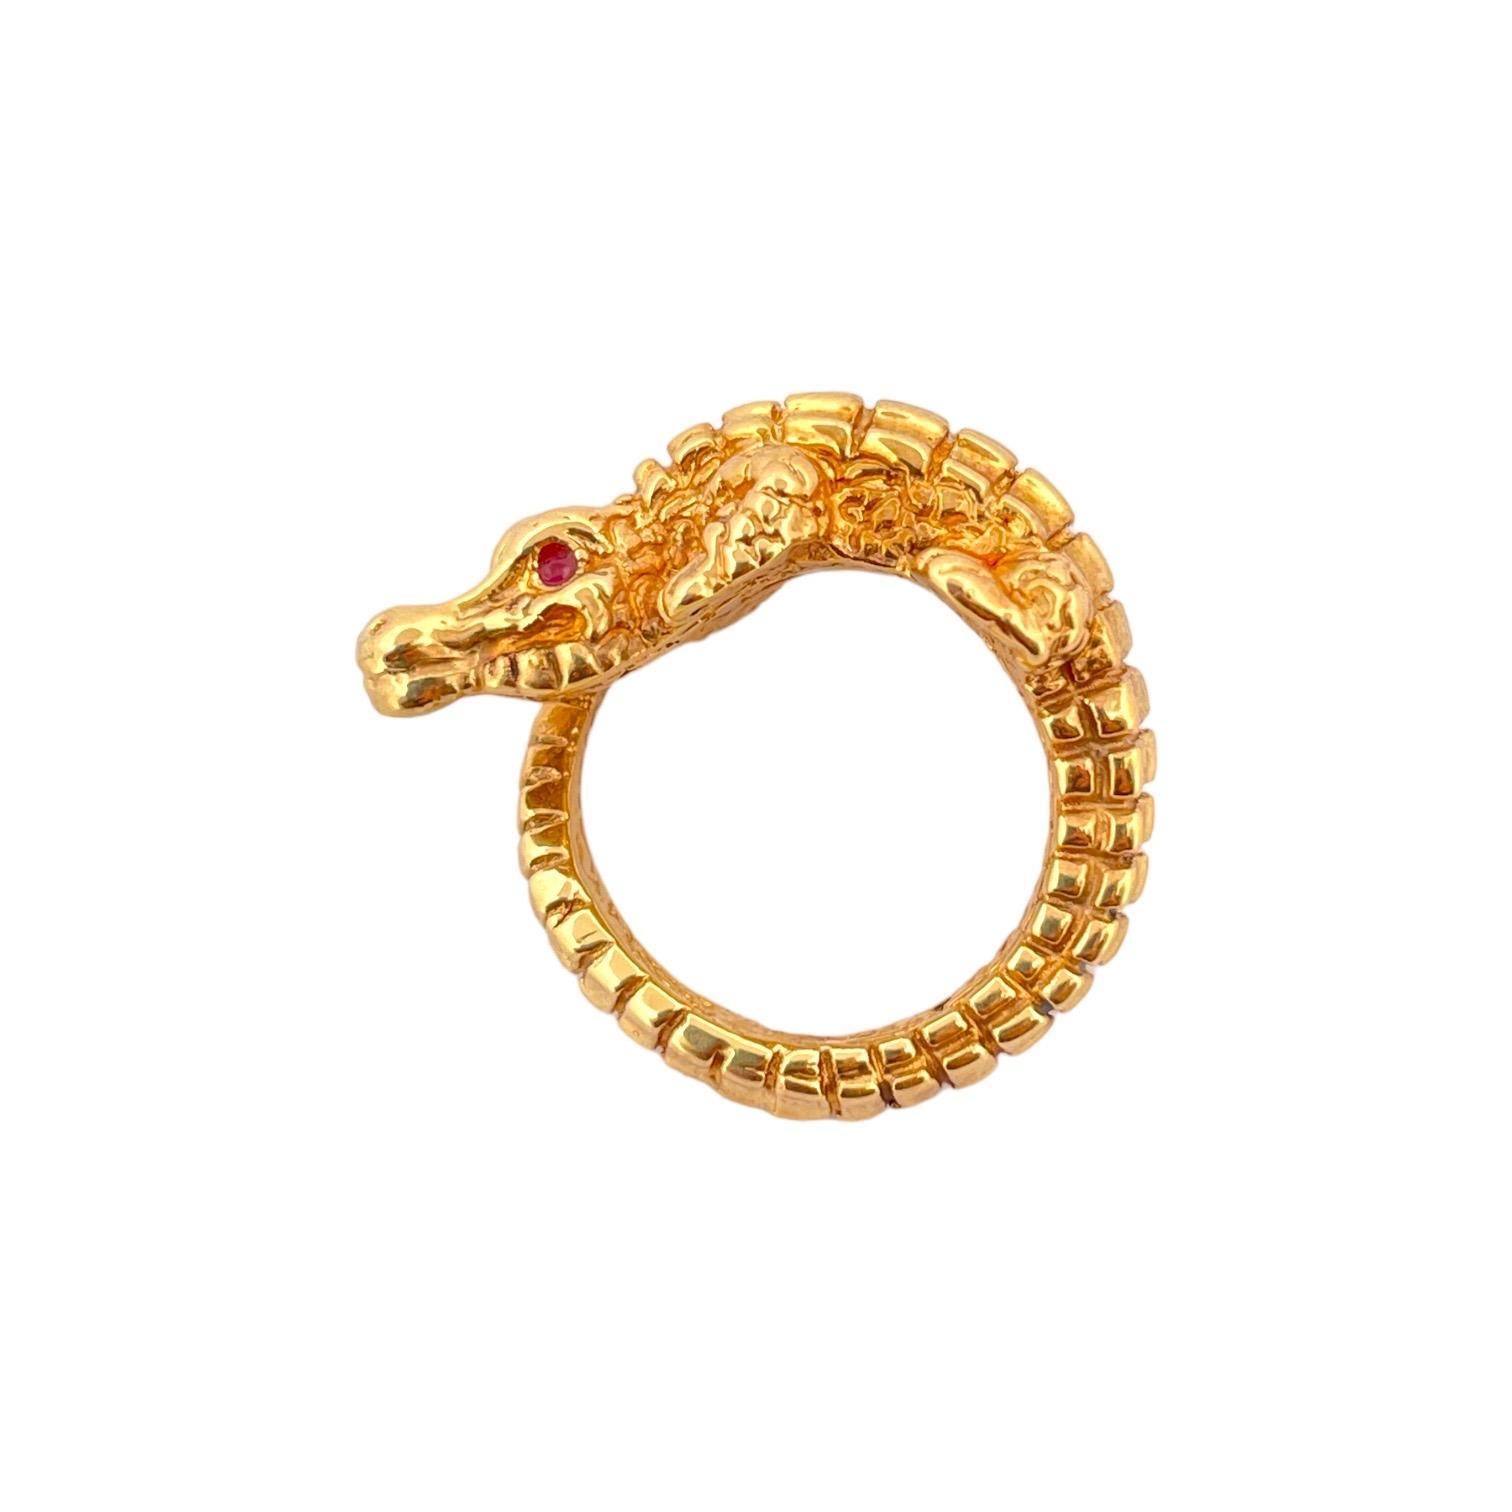 Unleash your wild side with our Ruby Eye Crocodile Ring. Crafted in 14K yellow gold and weighing 3.40 grams, this ring features captivating ruby eyes that give it a bold and exotic flair. Make a statement with this unique and fierce jewelry piece